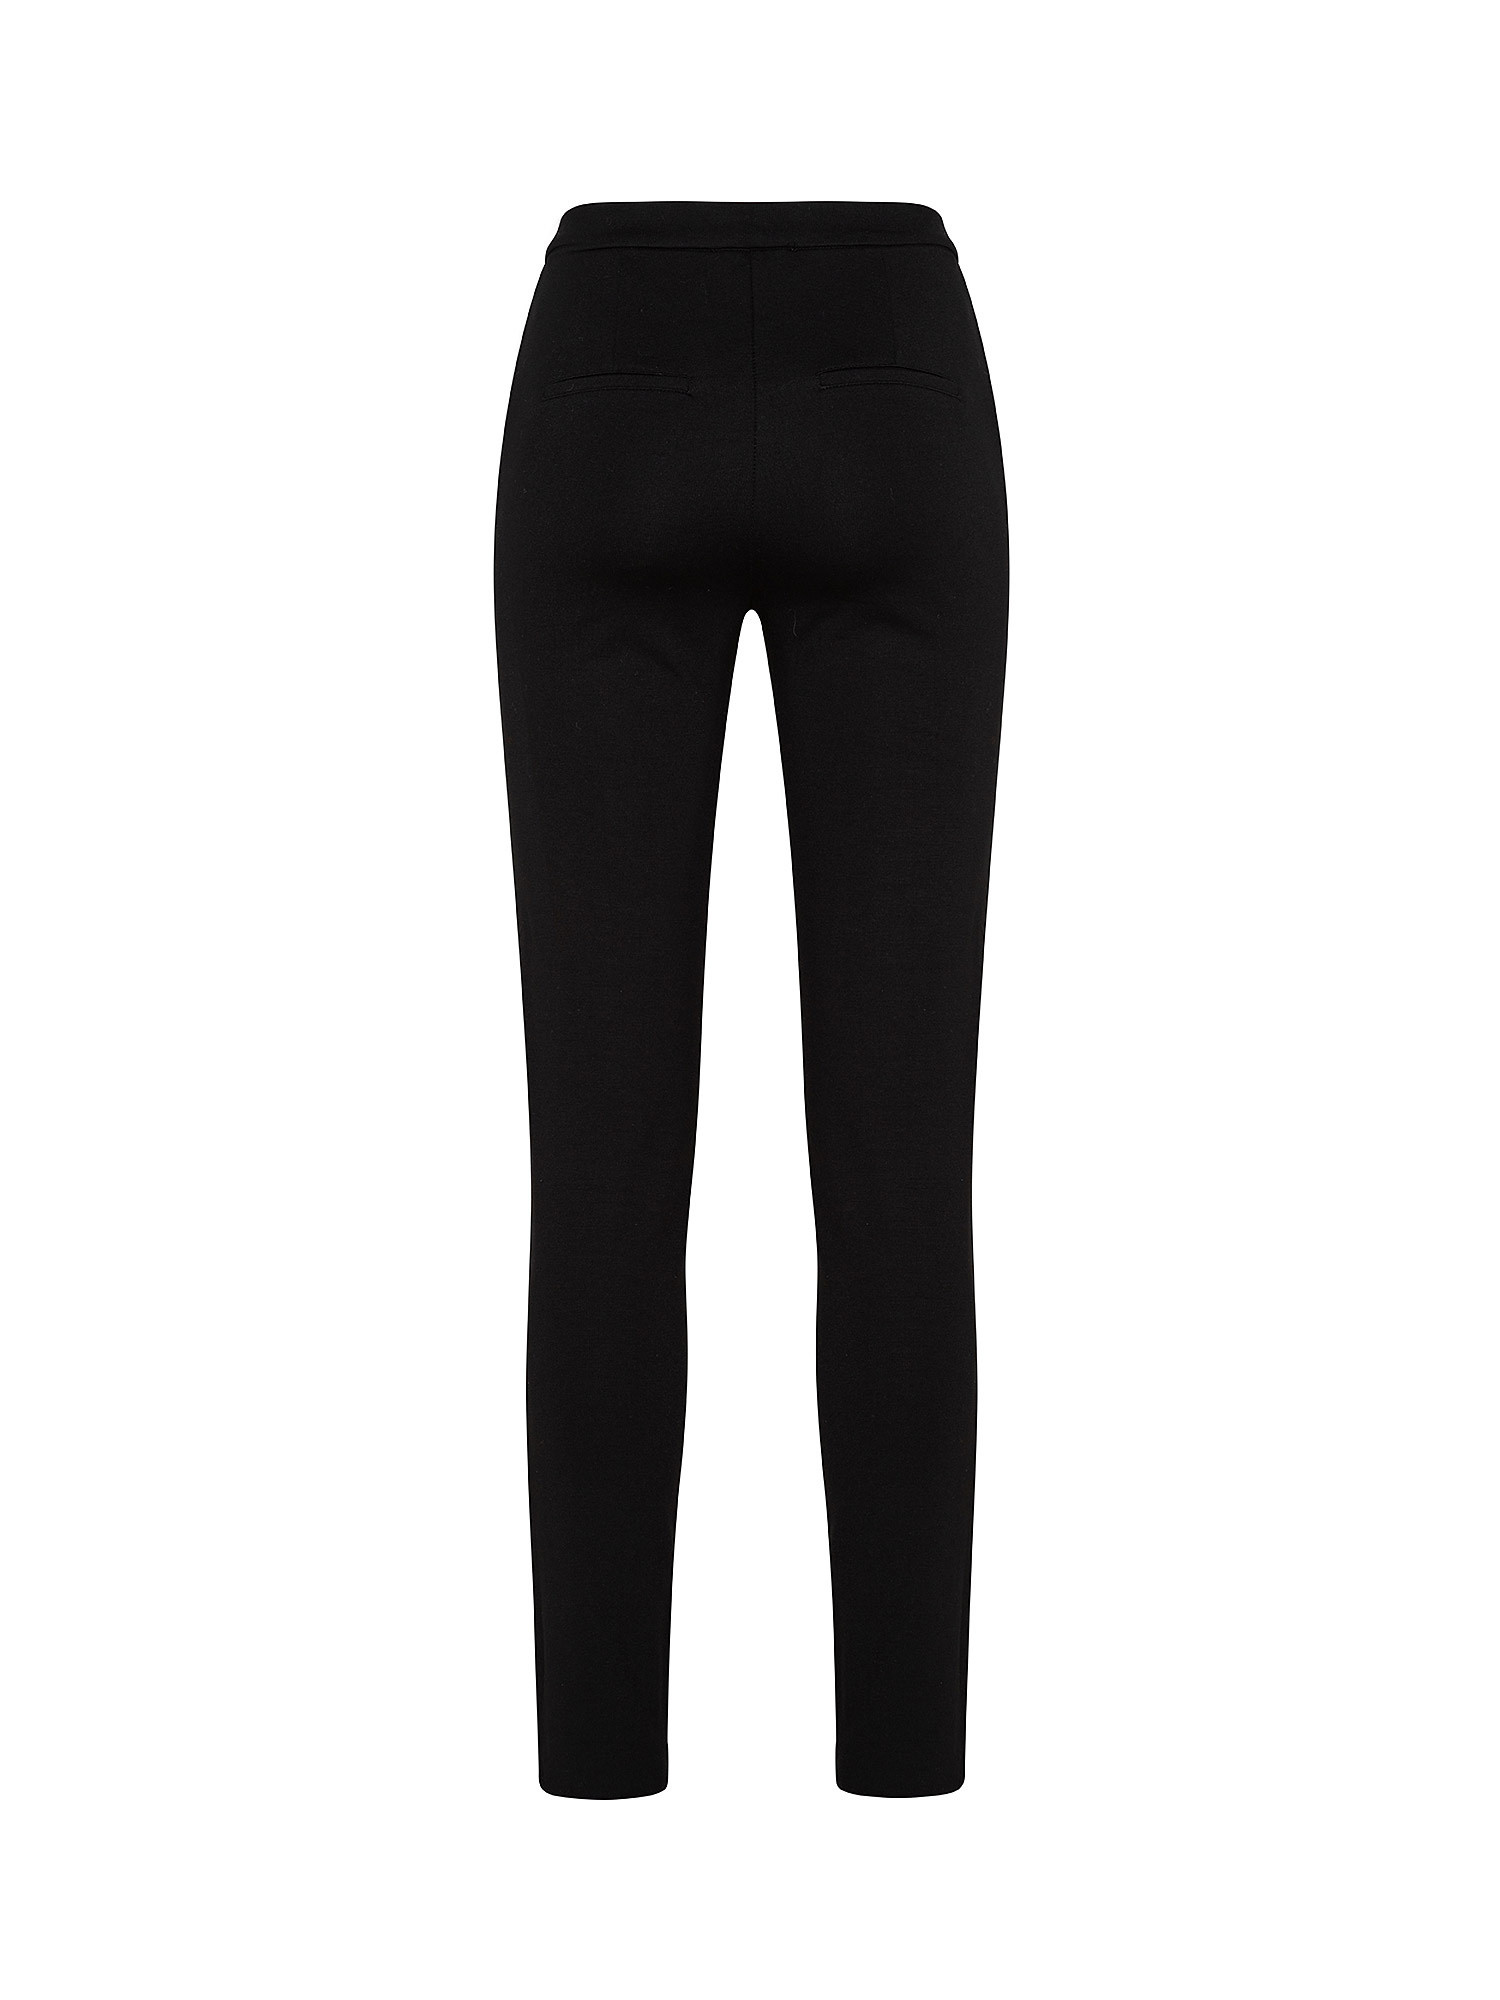 Solid color trousers, Black, large image number 1